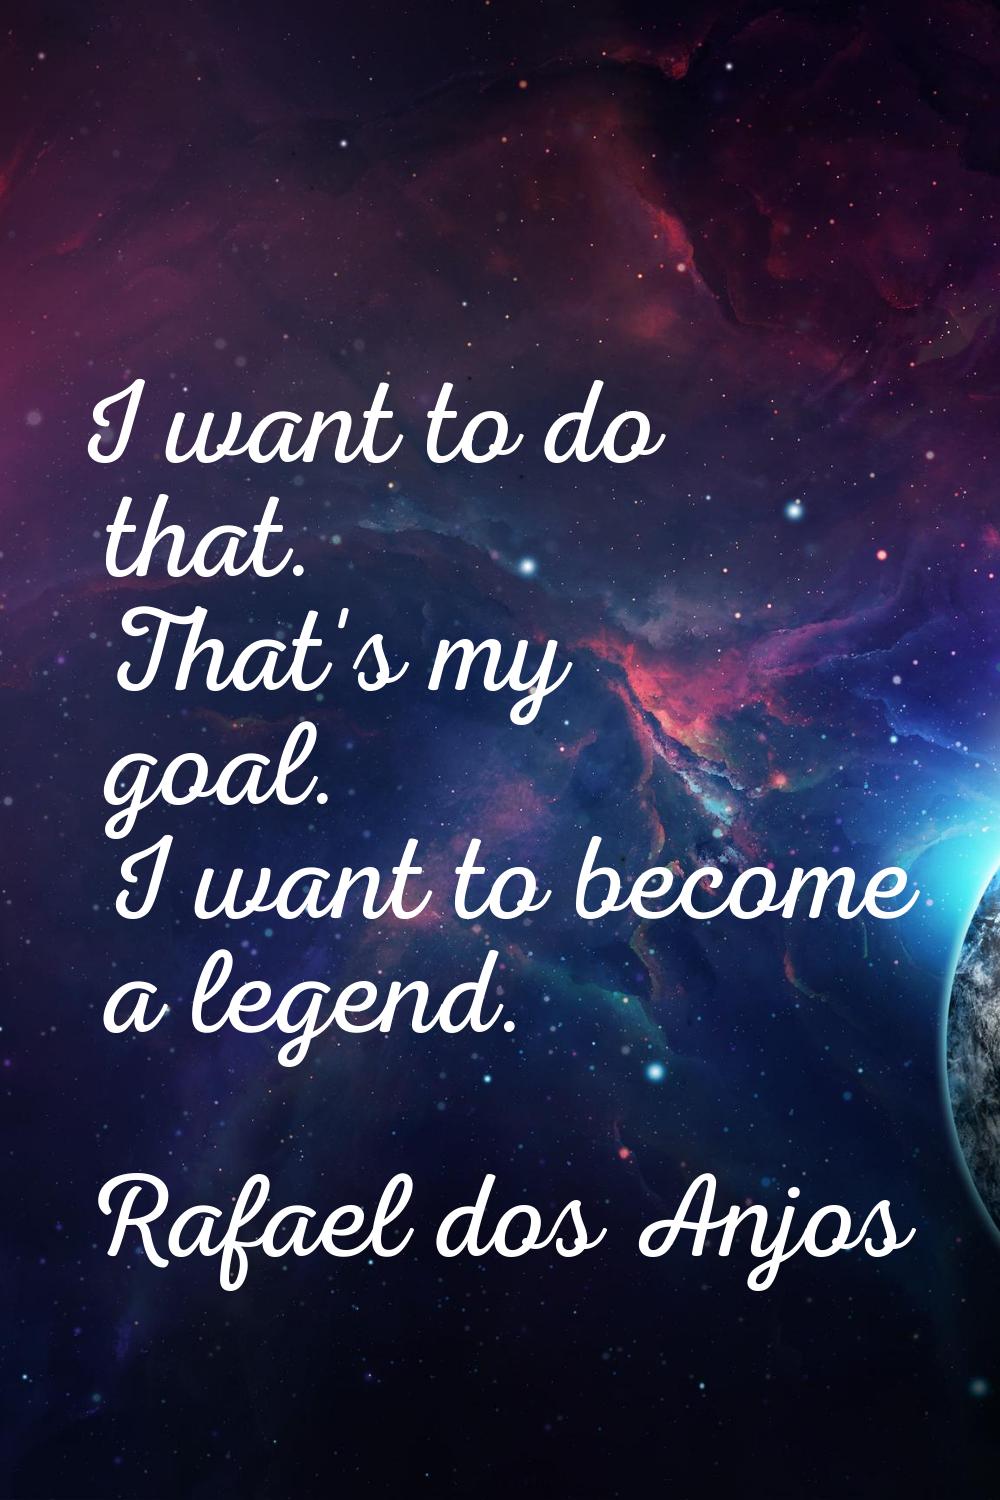 I want to do that. That's my goal. I want to become a legend.